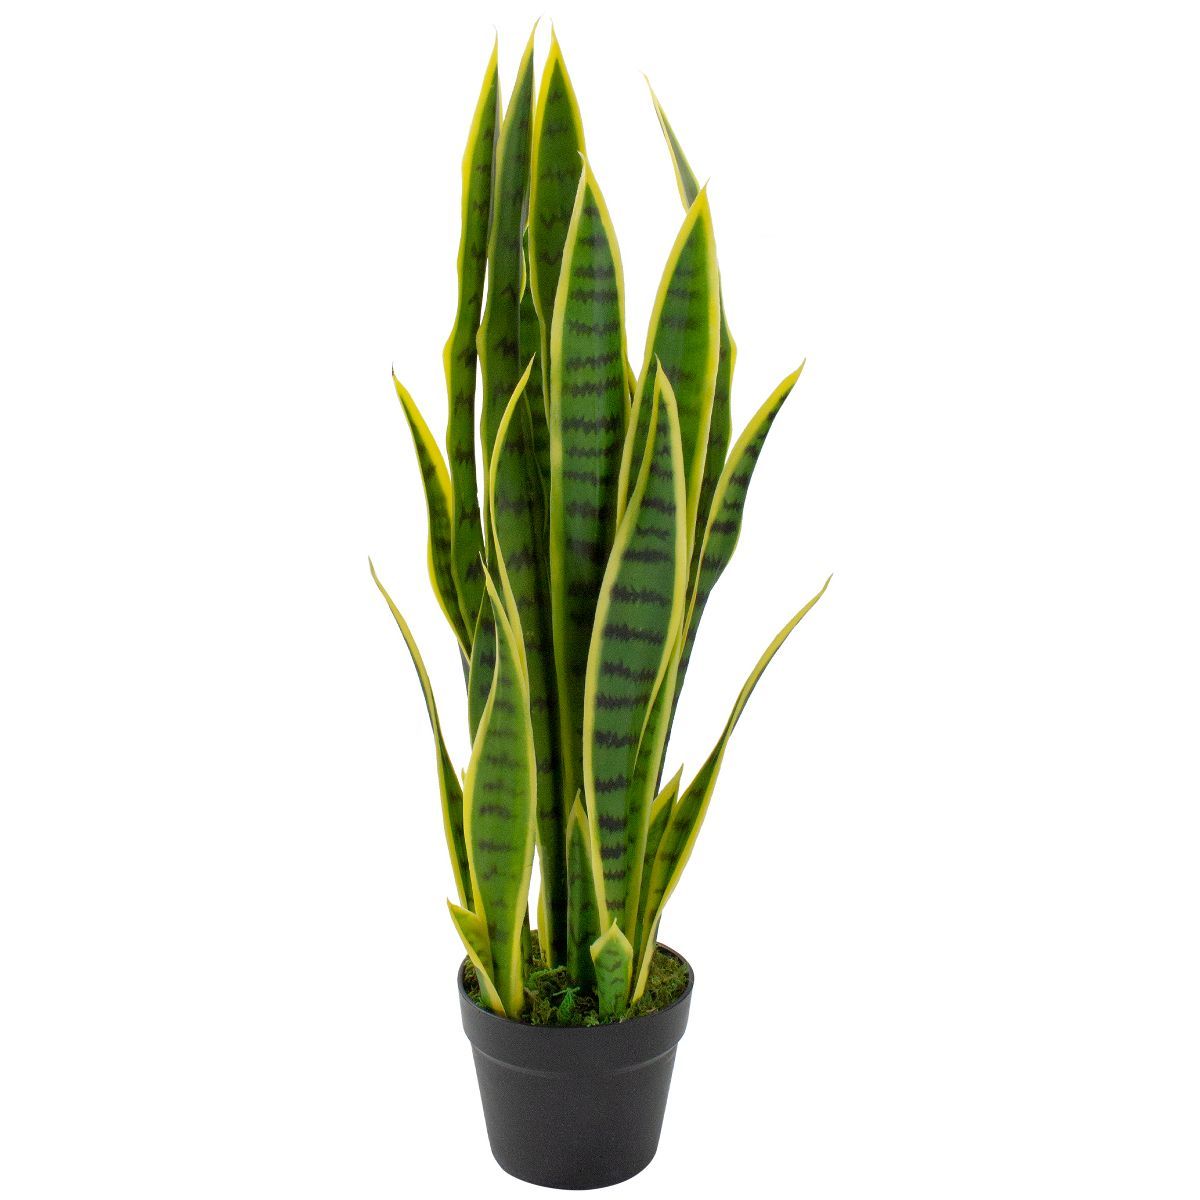 Northlight 29" Artificial Potted Green Striped Leaf Dracaena Snake Plant | Target